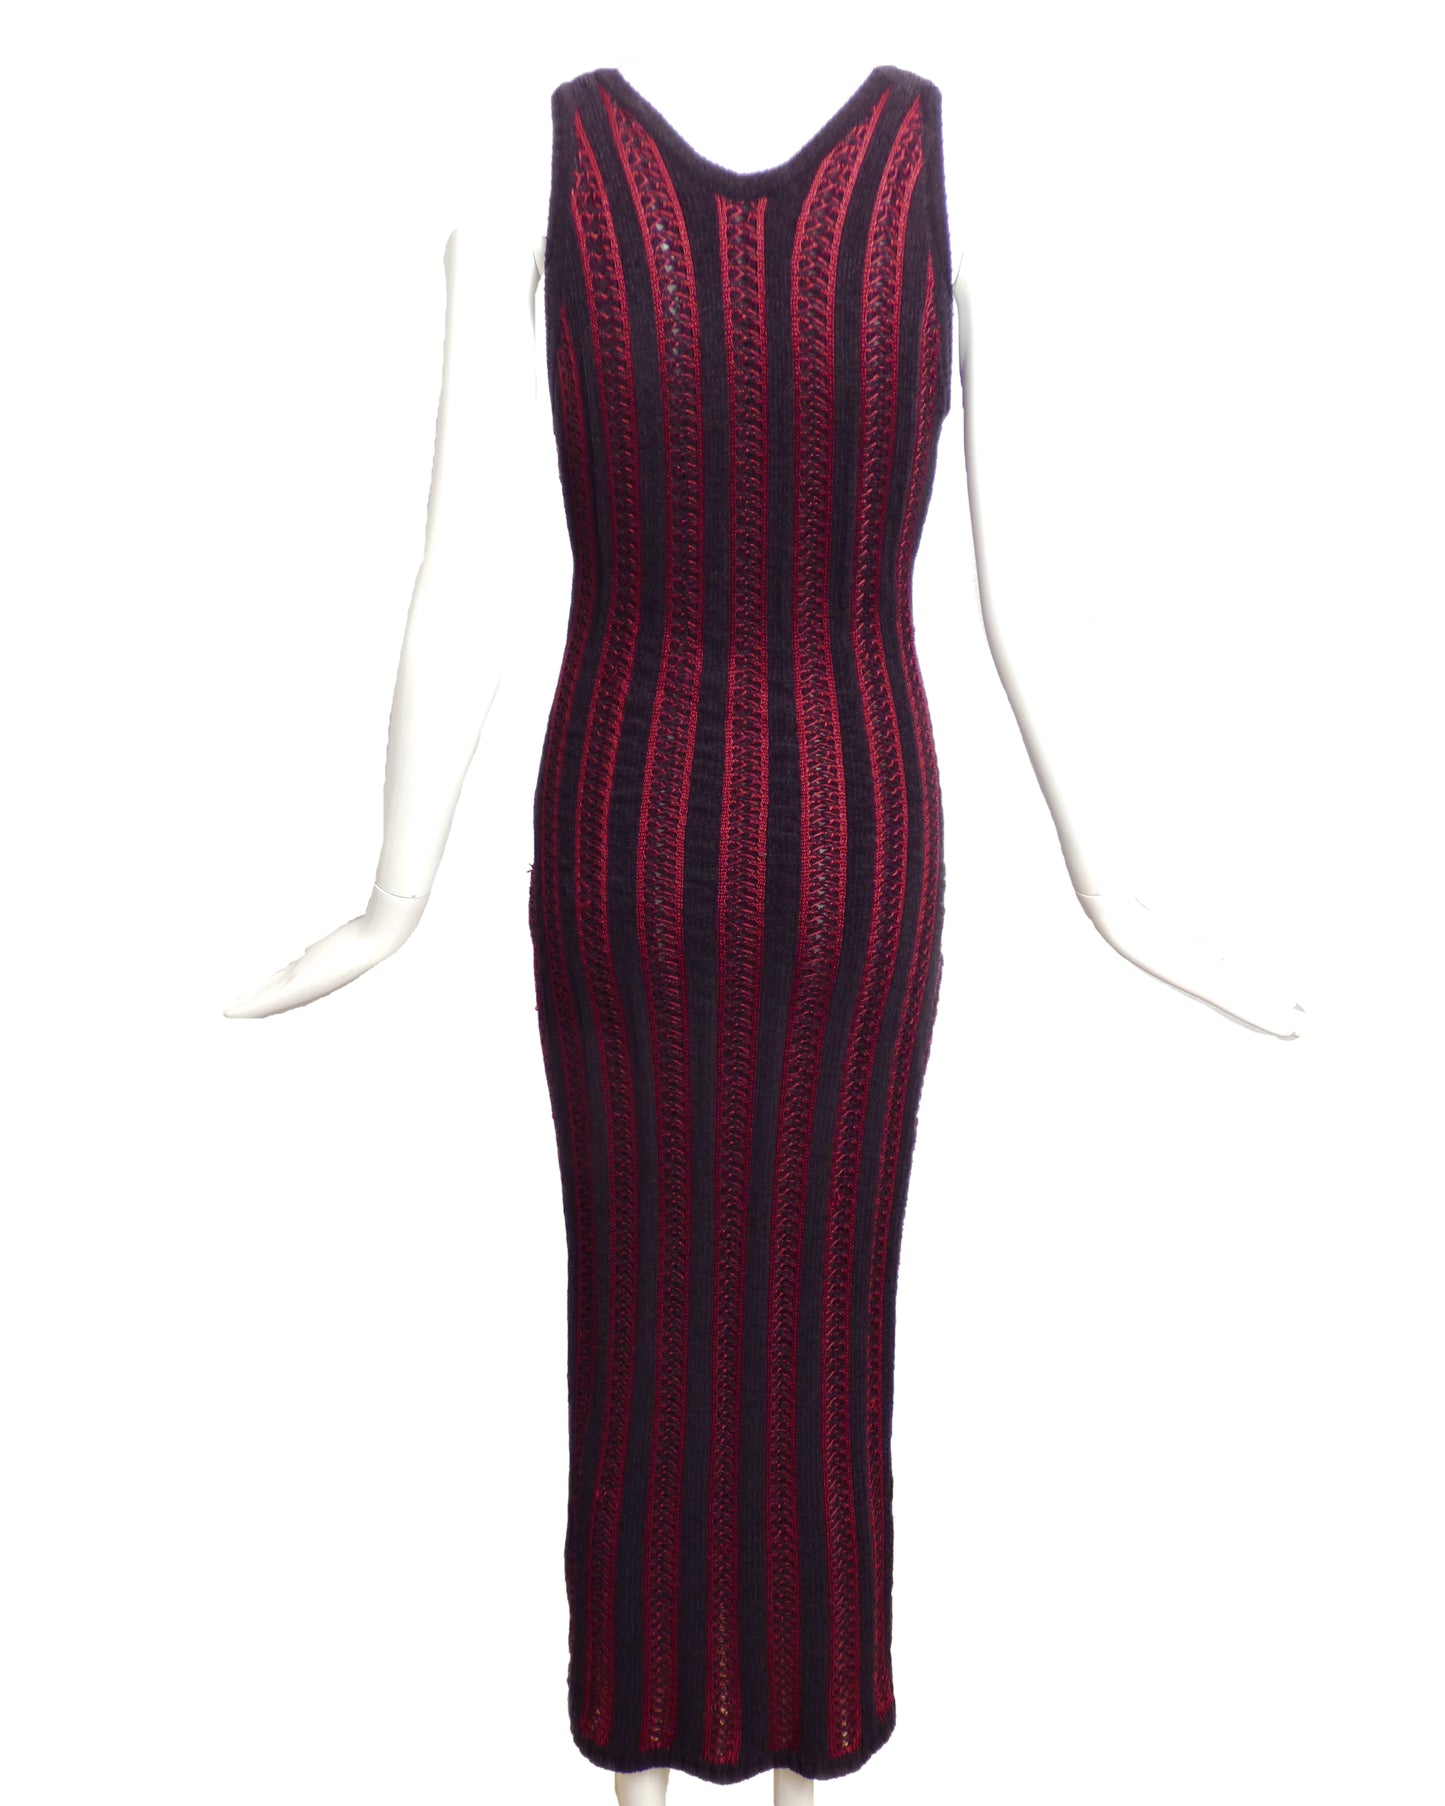 GIANNI VERSACE- 1990s Chenille Knitted Evening Dress, Size-8